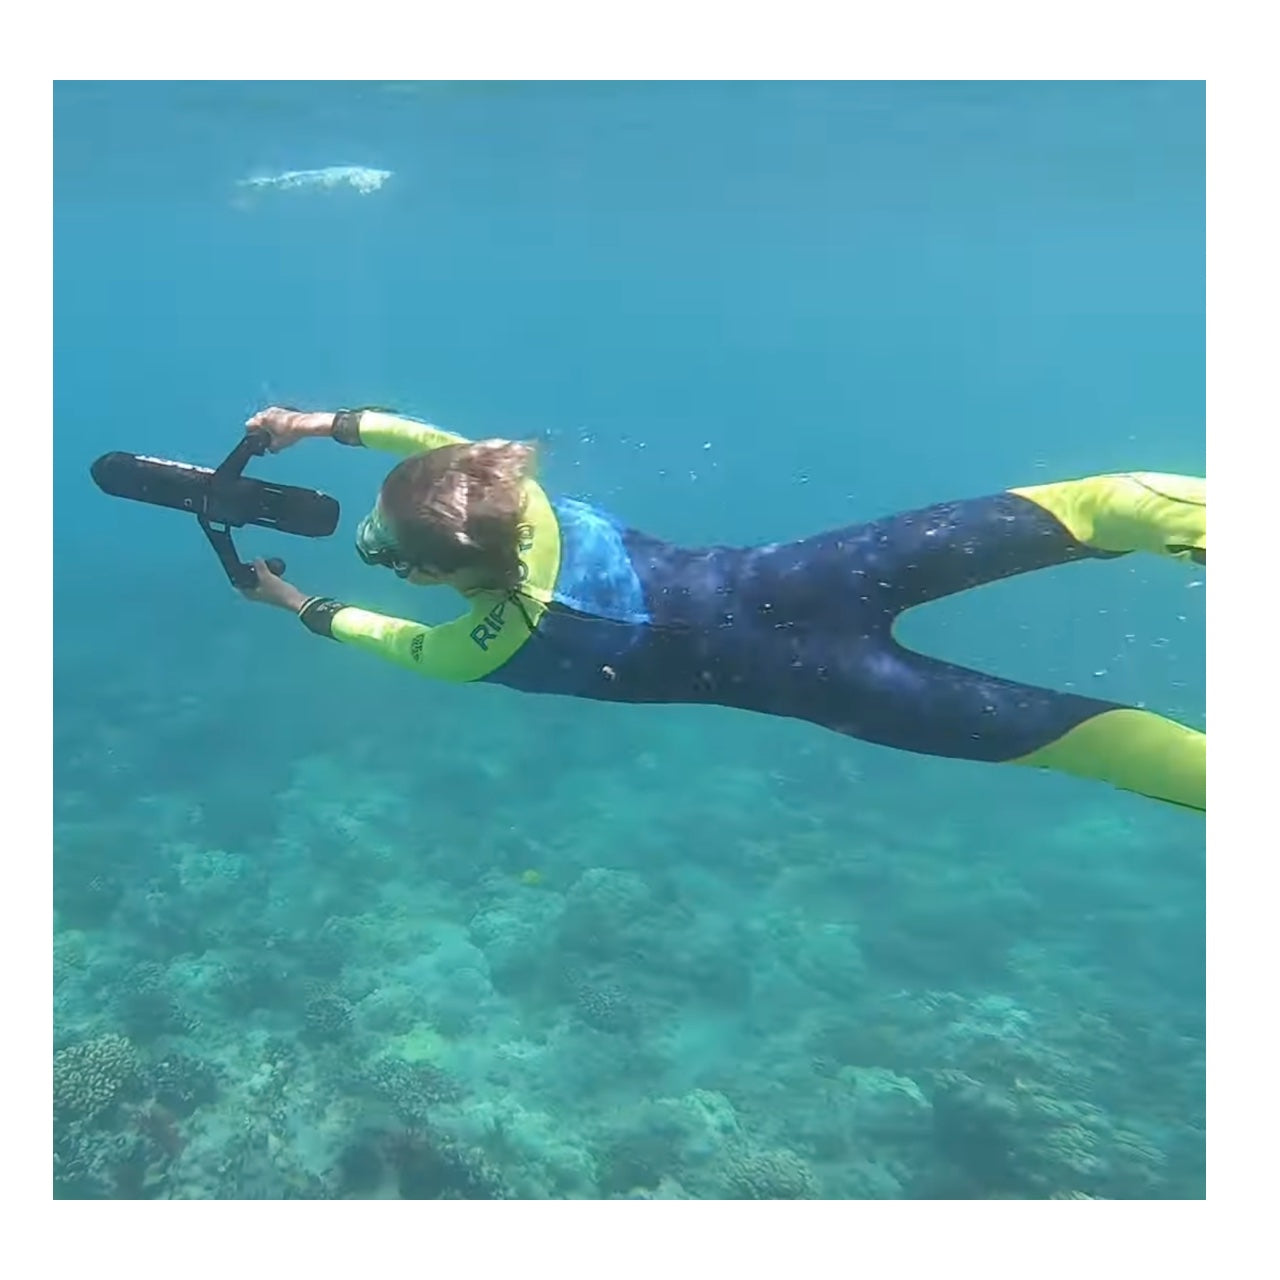 A young girl uses the ScubaJet Pro with Underwater Kit so she can use the underwater scooter to explore the ocean. She is wearing a bright wetsuit and we see their view from the top.